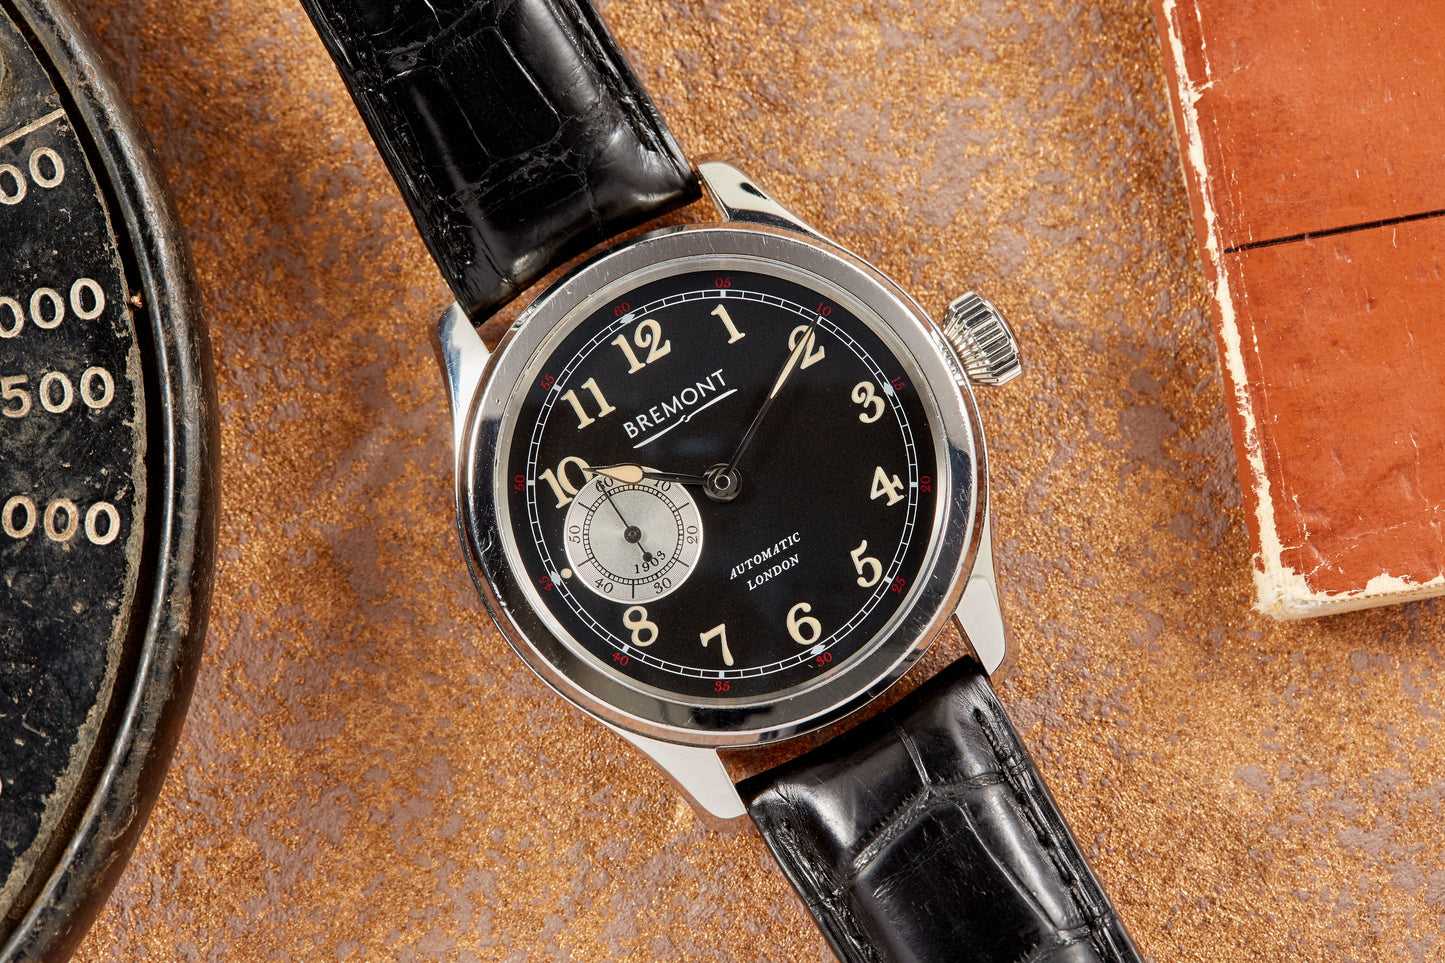 Bremont Wright Flyer